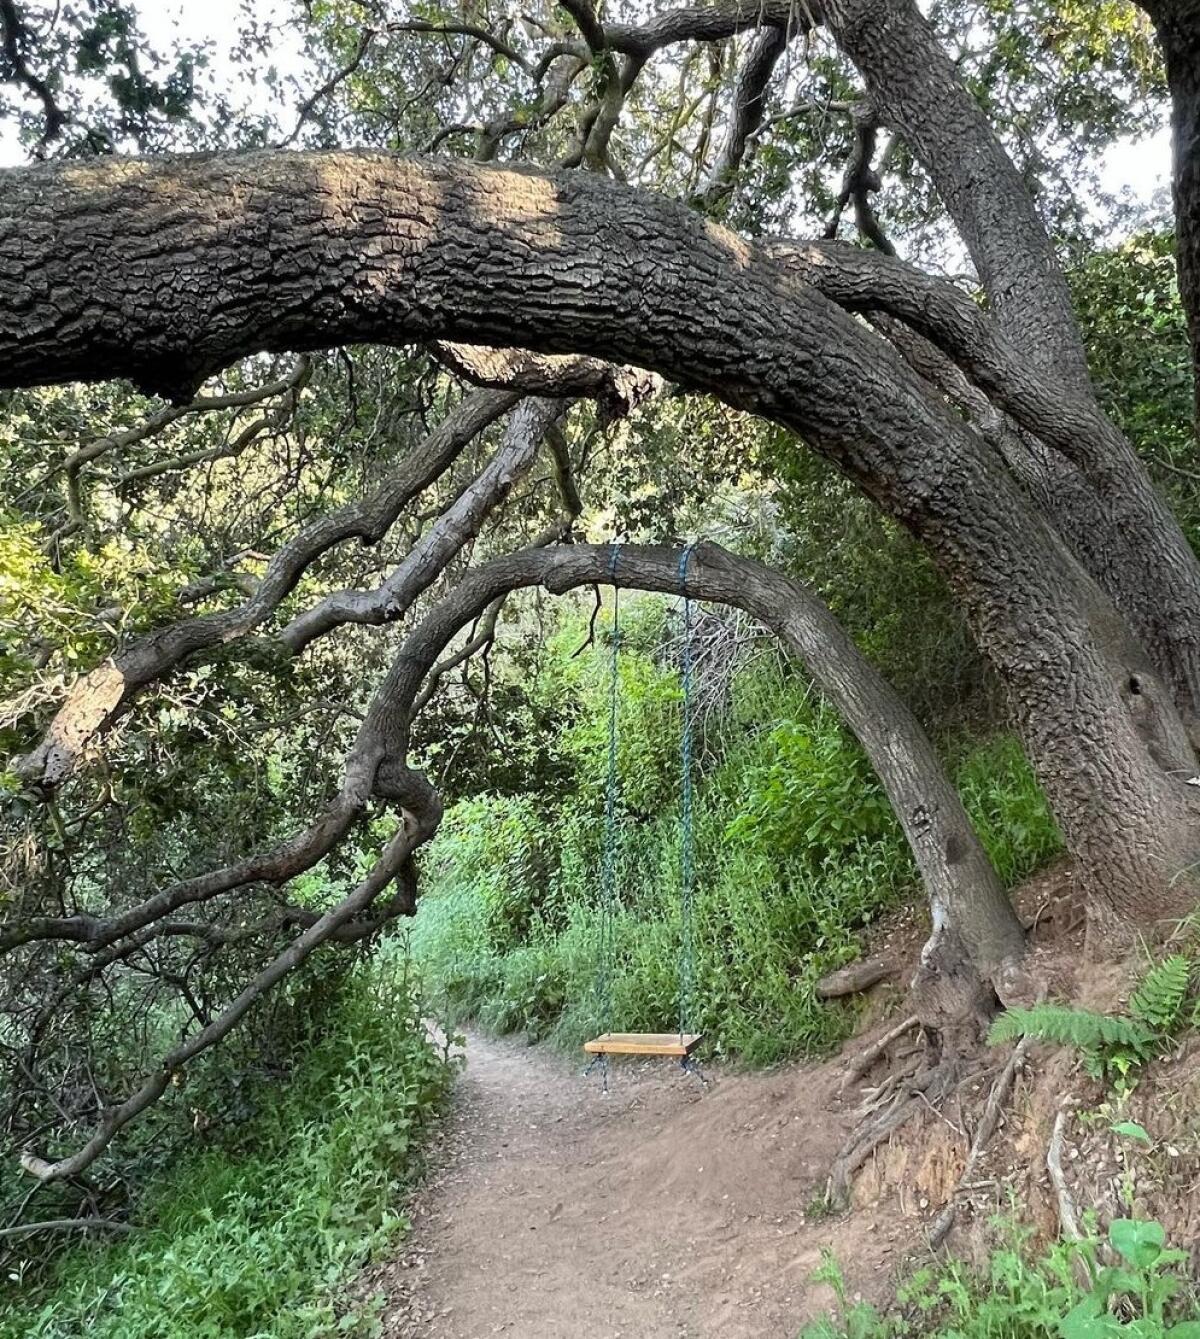 A huge bending tree with a swing dangling above the Fryman Canyon hiking trail.